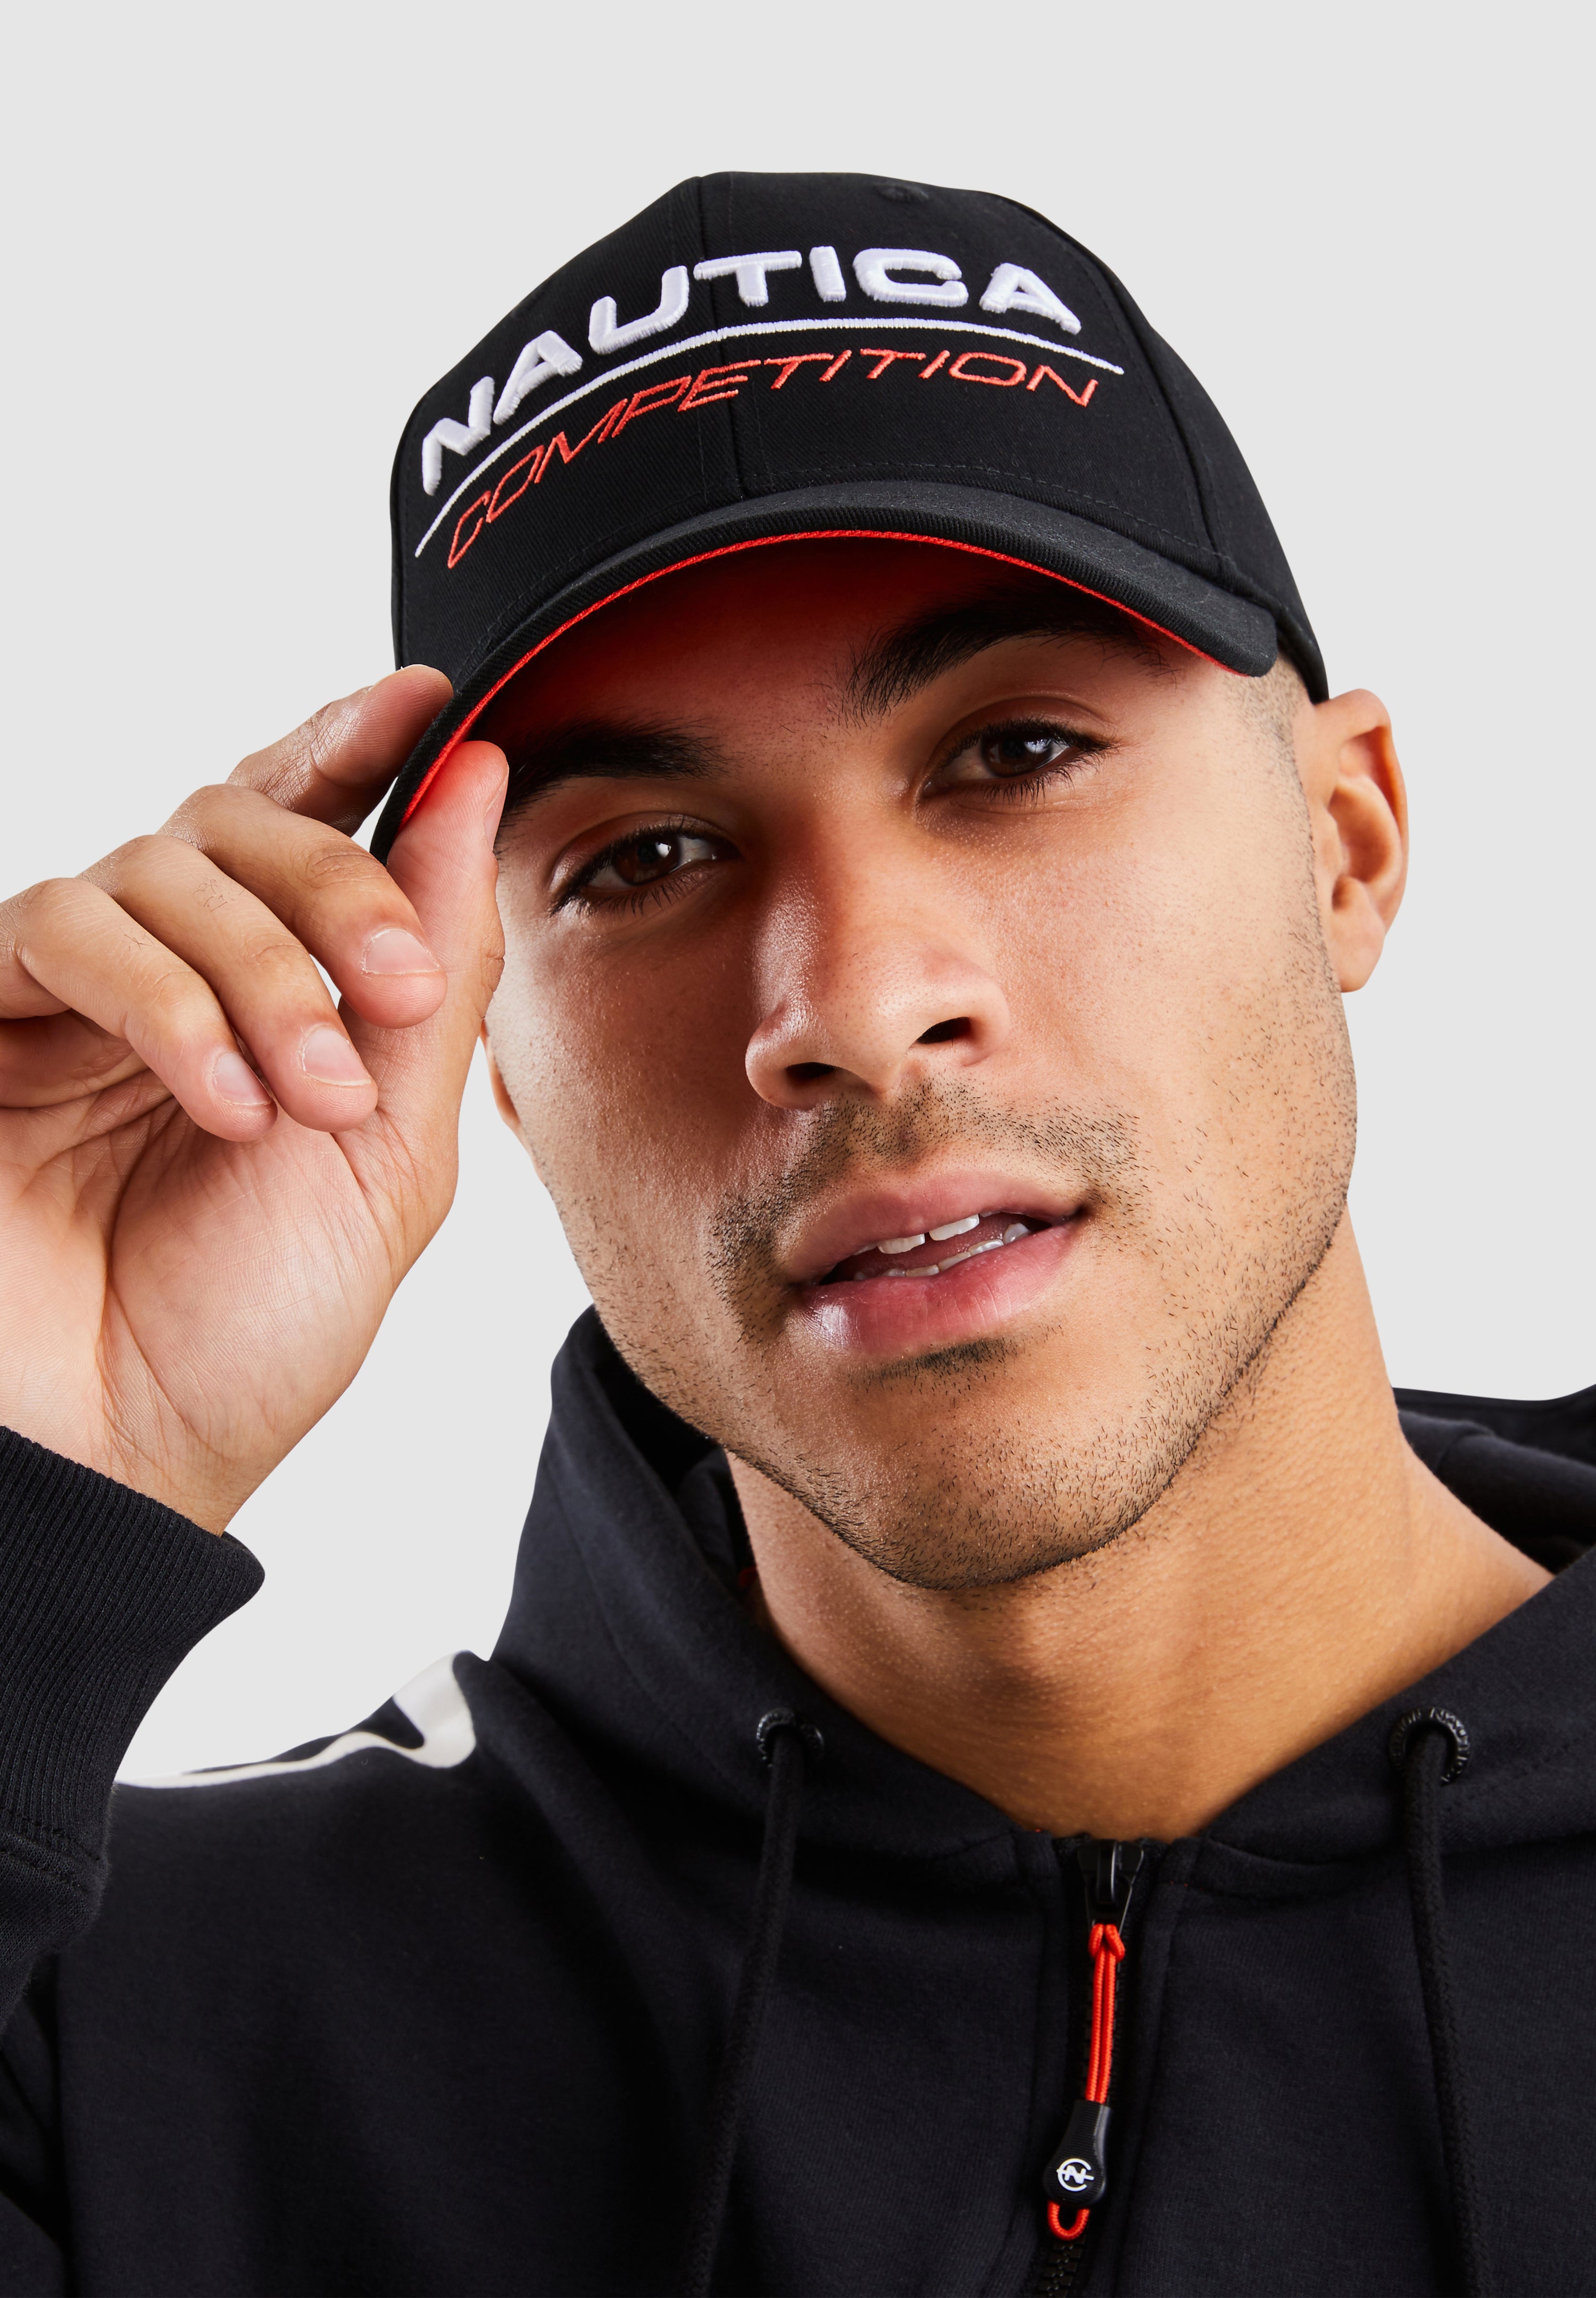 Nautica Competition Tappa Snapback Cap - Black - Front